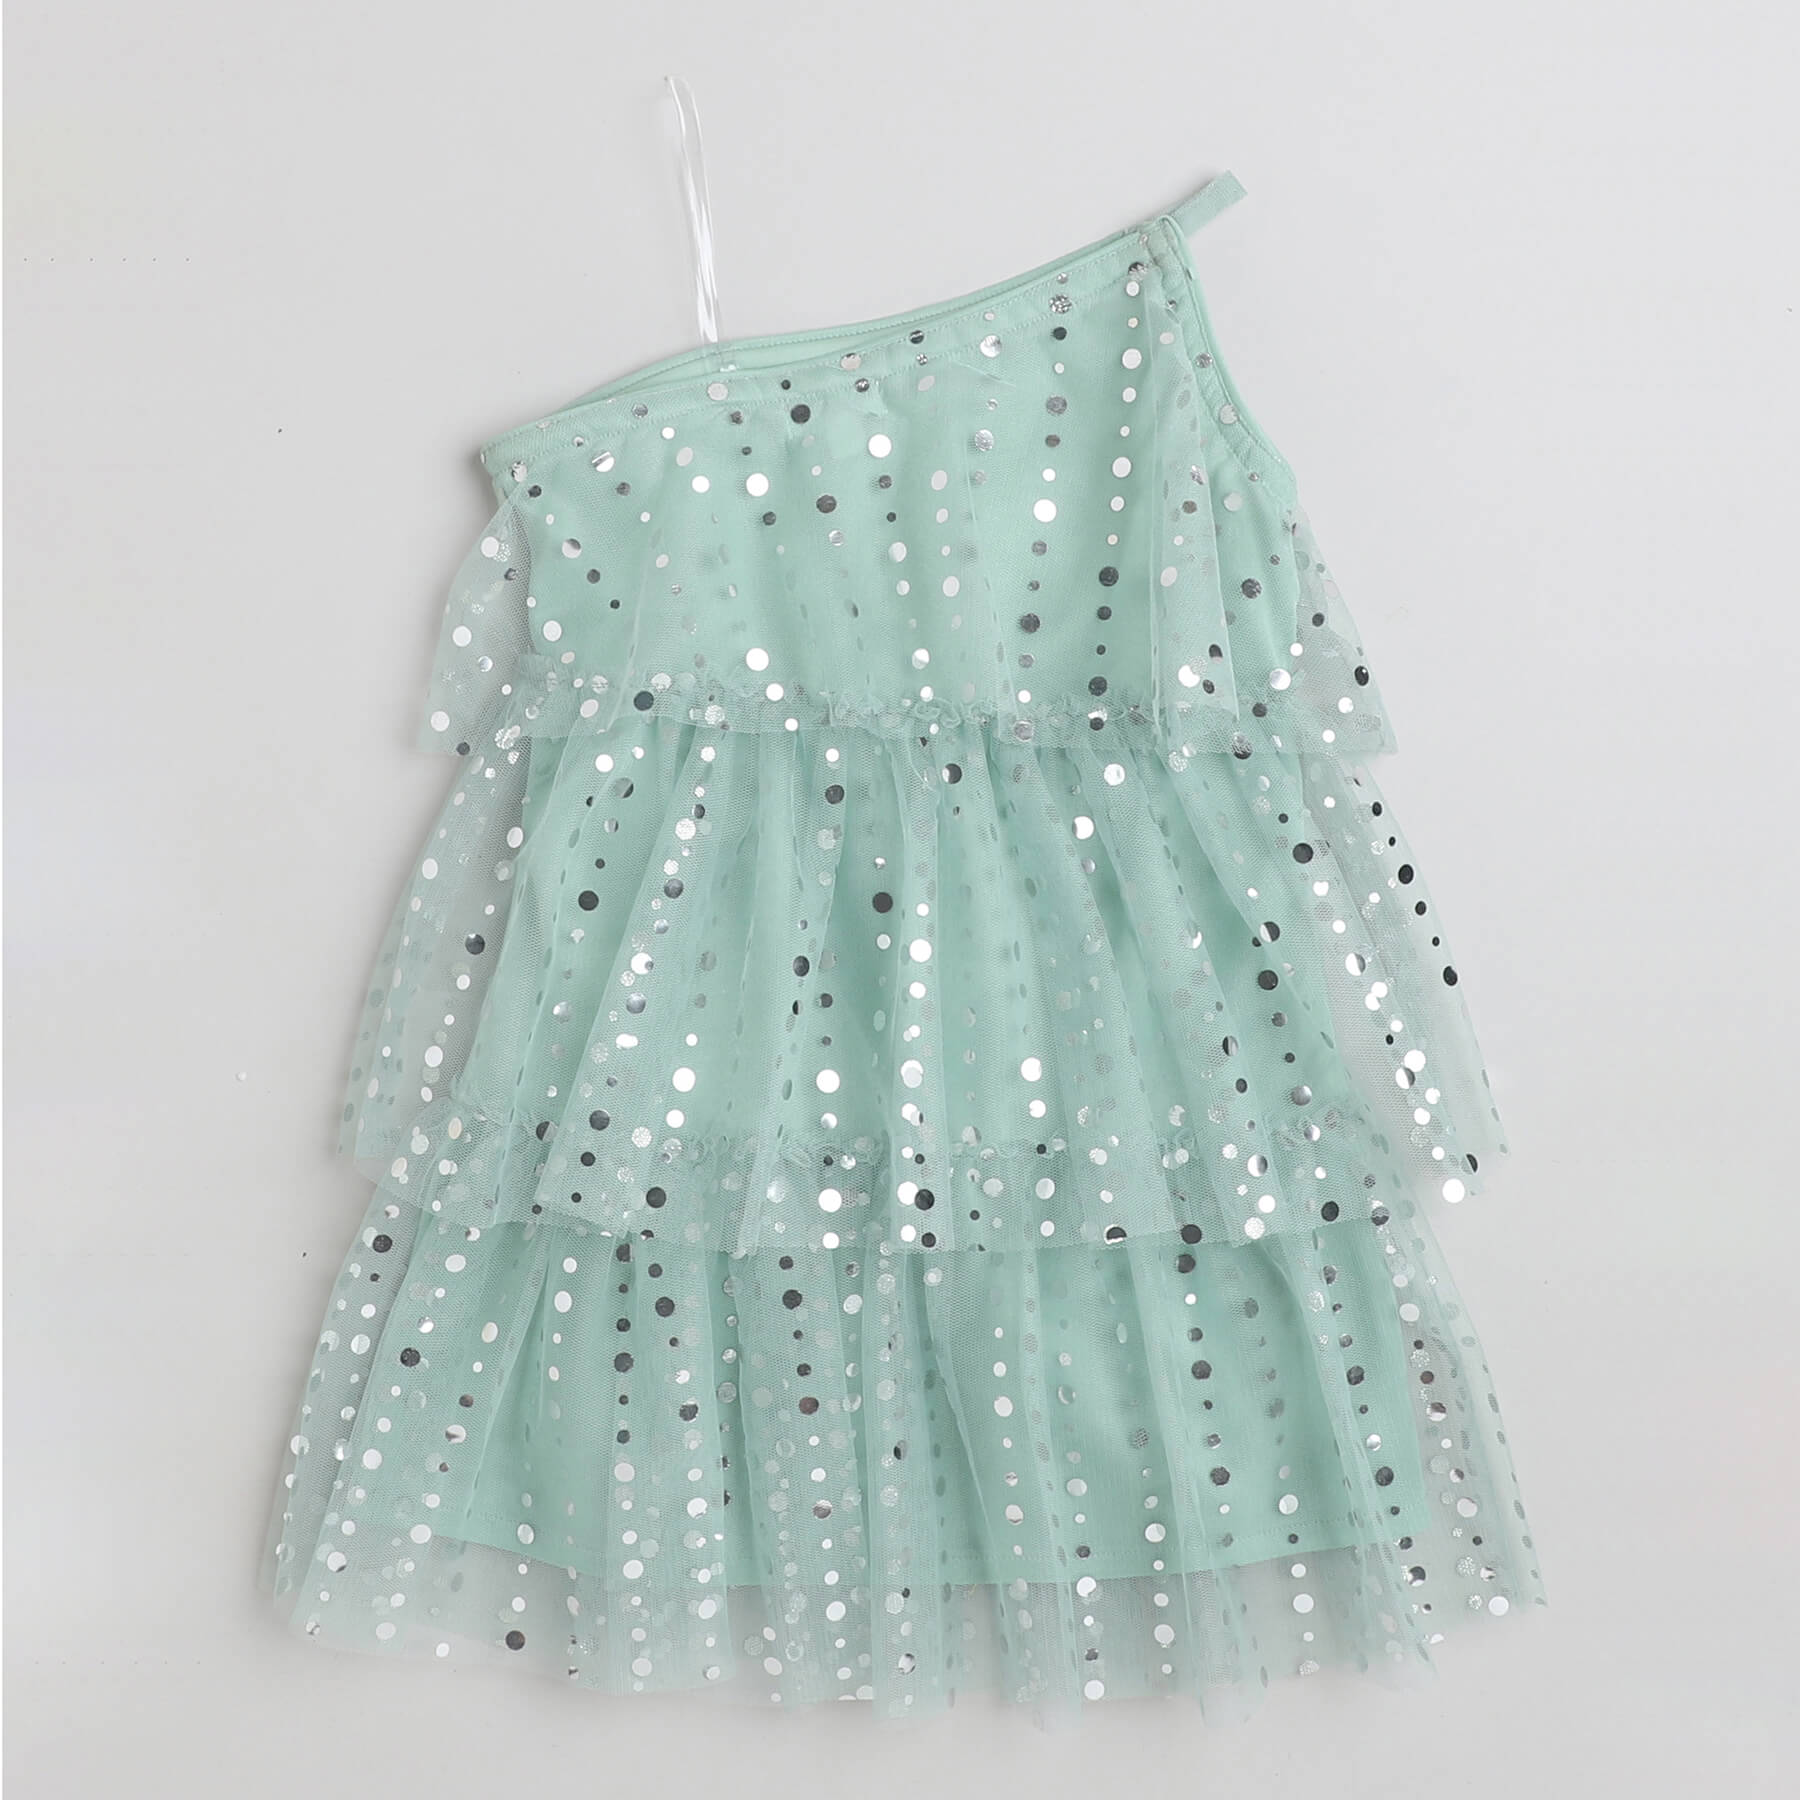 Taffykids sequins embellished Asymmetric layered party dress-Sage green